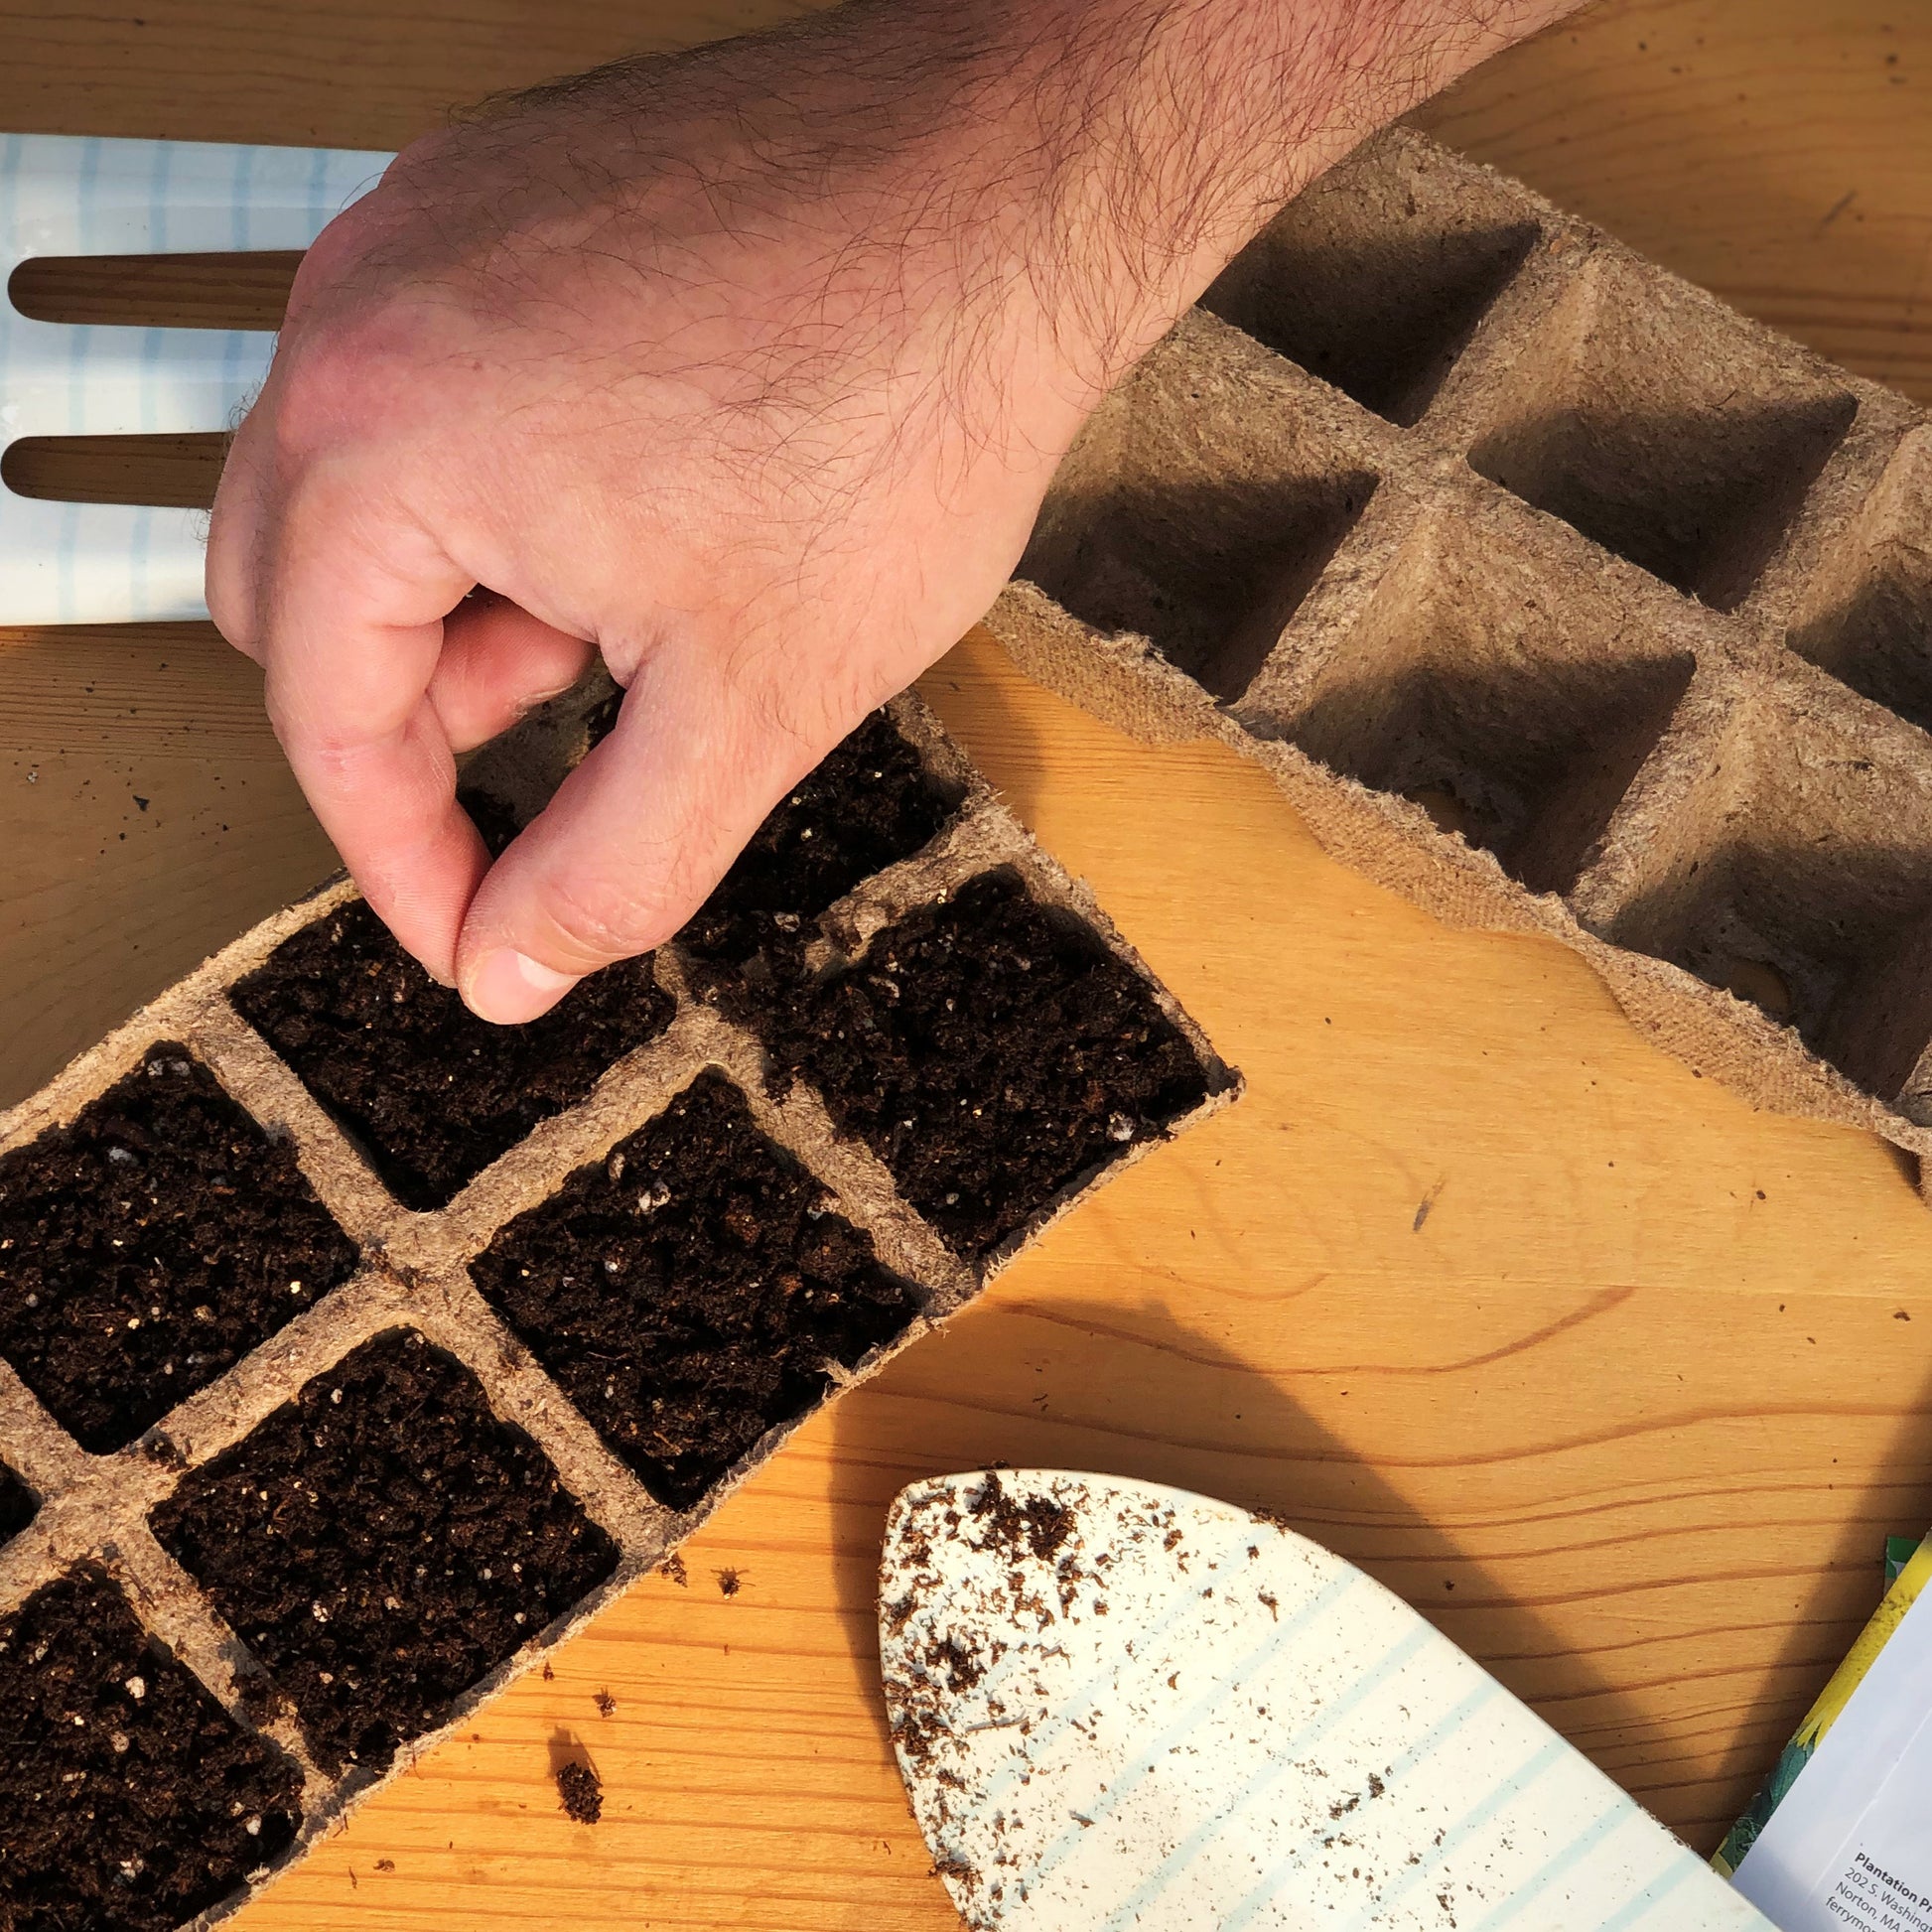 Sow your Clemson Spineless #80 Okra seeds into Jiffy peat strip trays filled with sowing mix for easy transplanting when seedlings are ready.